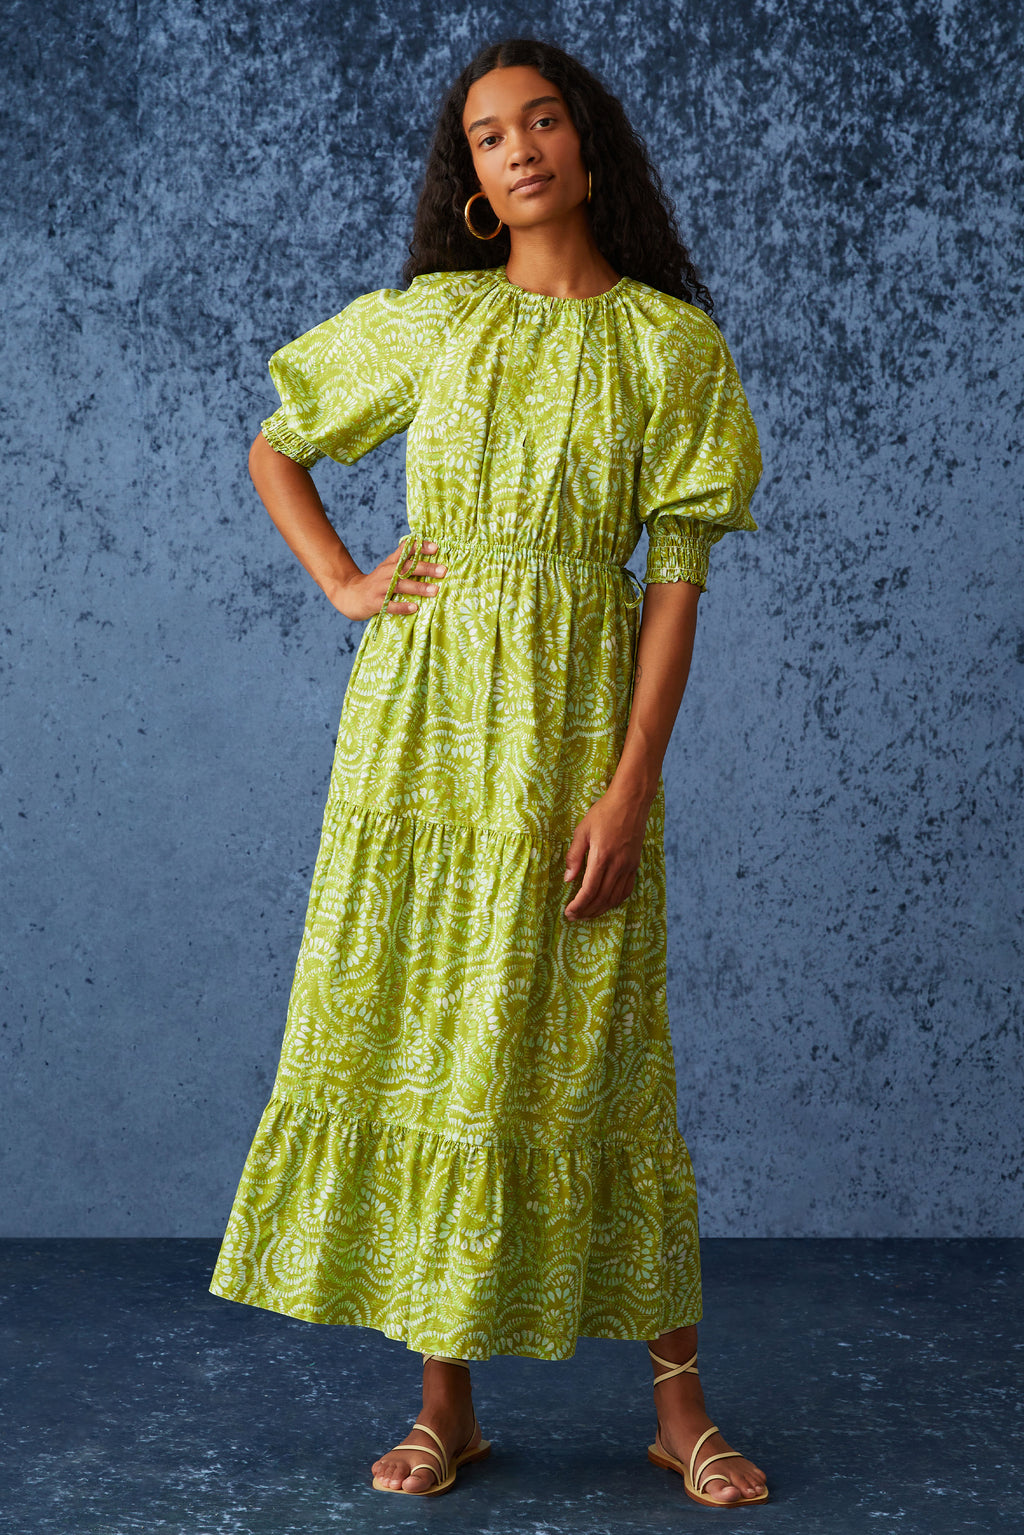 Bright green midi dress cinched at waist with puff sleeves